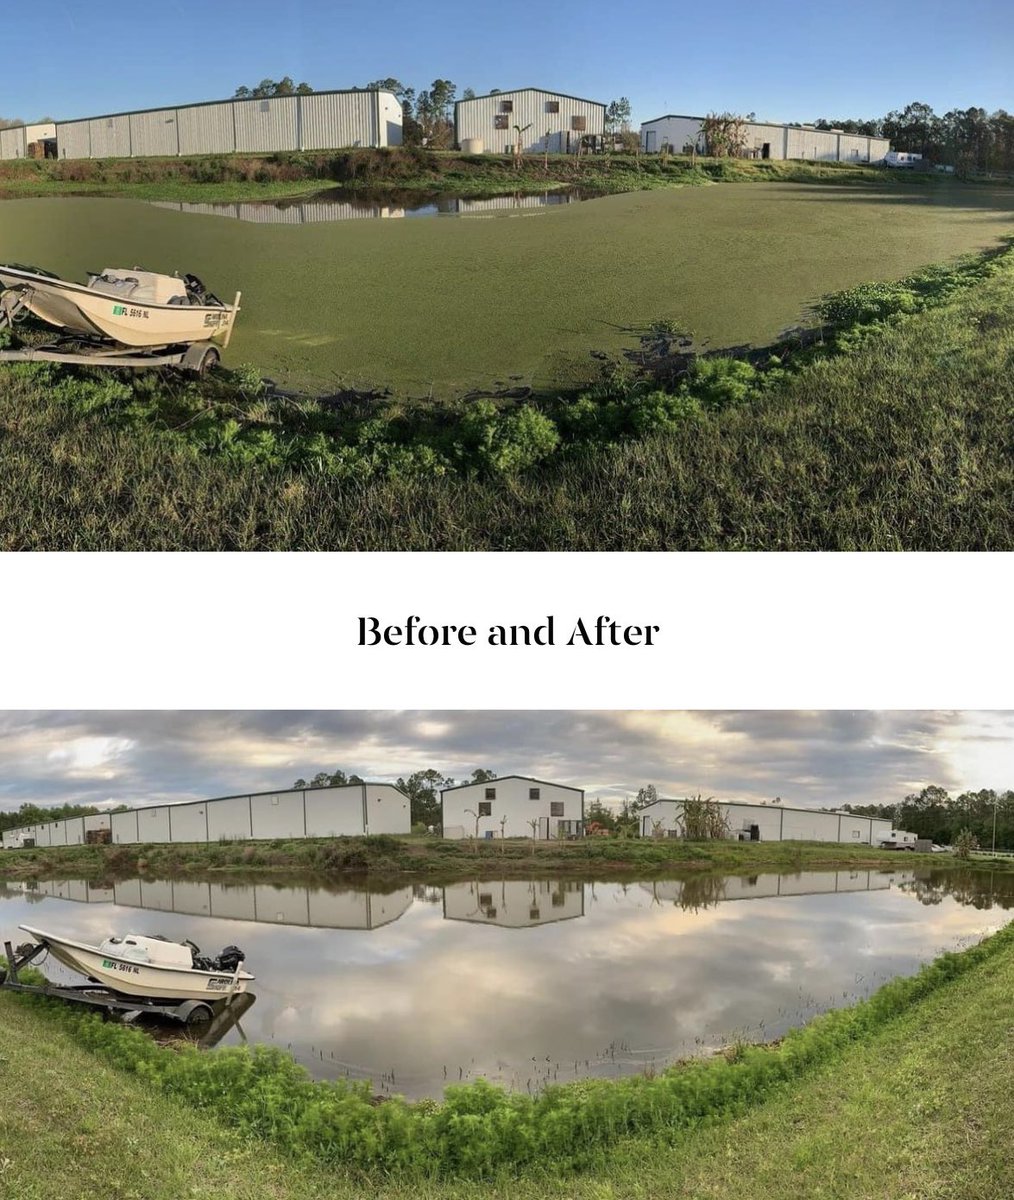 Experience the beautiful transformation before and after of our expert pond management practices at The Lake Doctors! Whether you are looking for solutions or improvements, we have the expertise, equipment, & network you need to ensure the well-being of your aquatic environment.